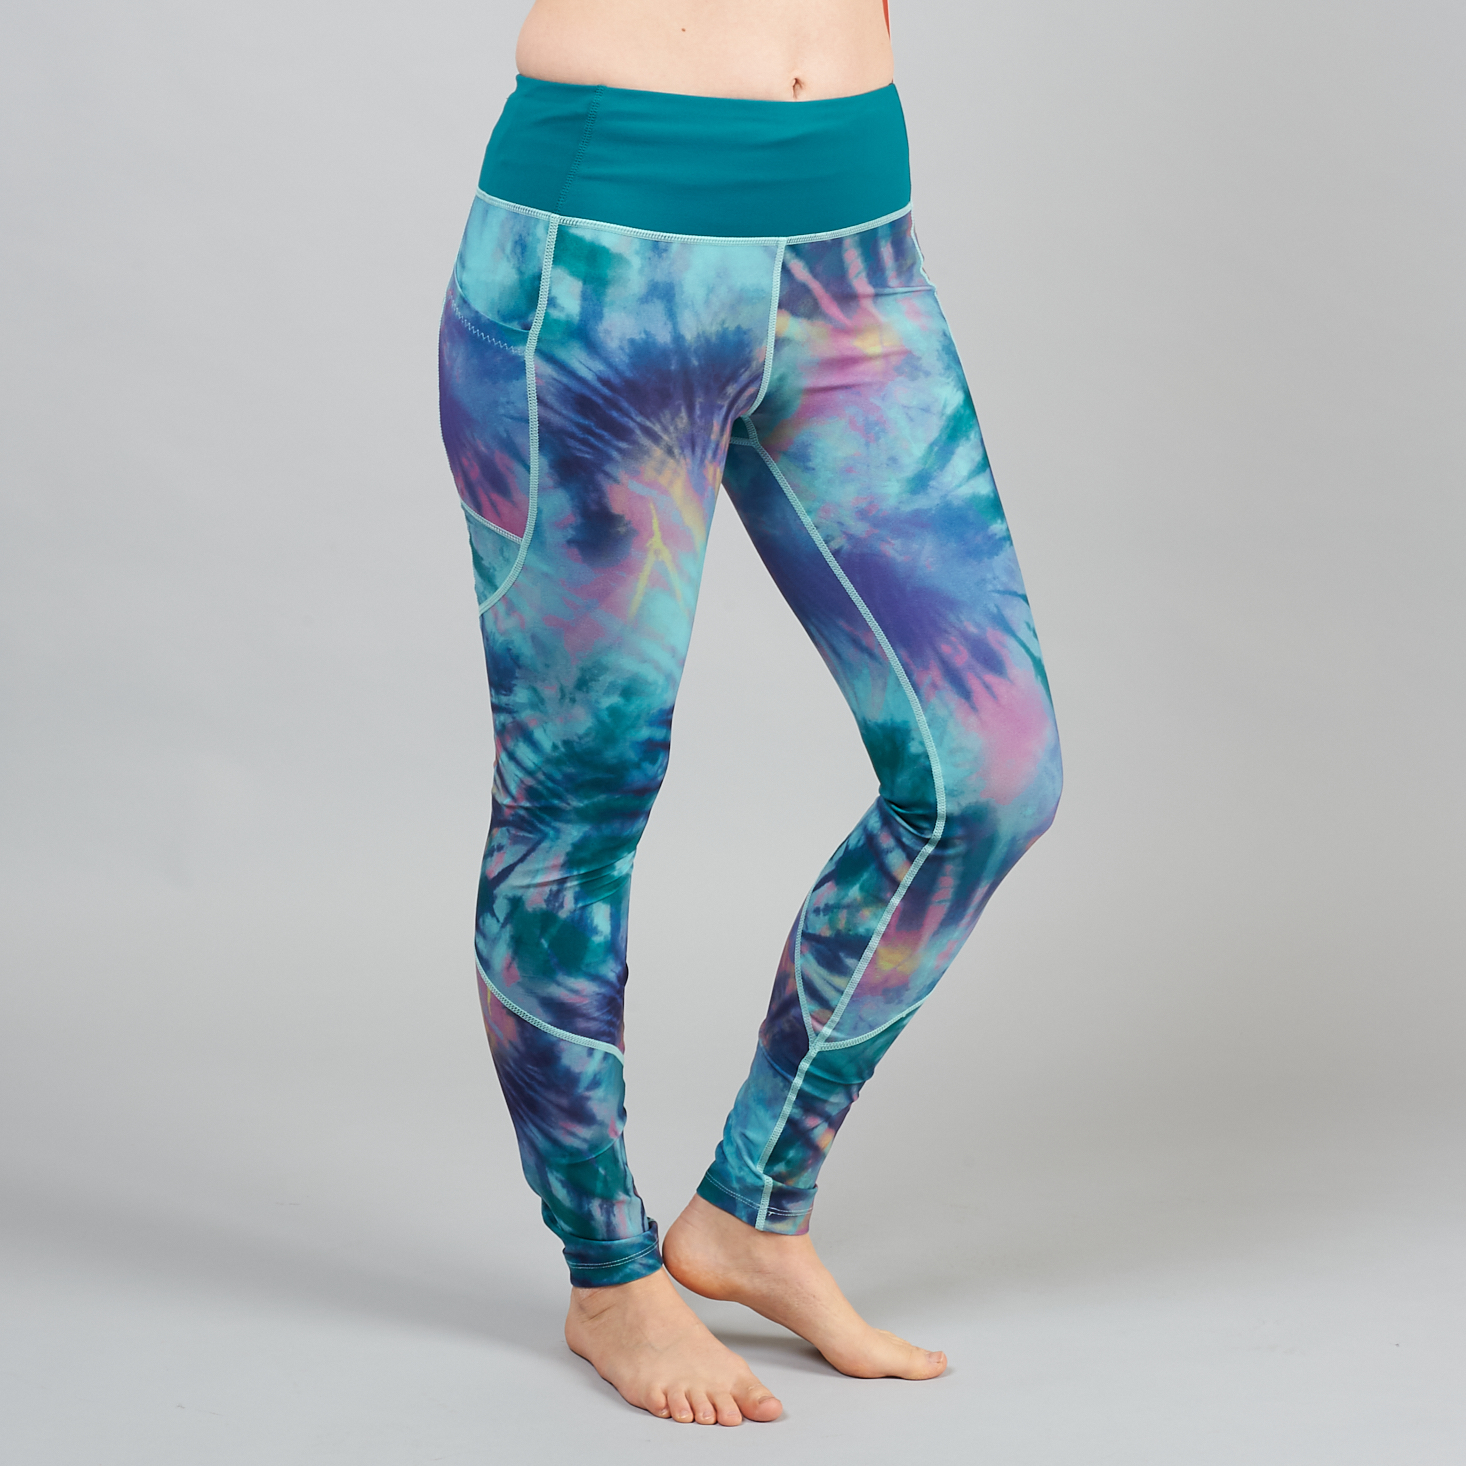 Wantable Fitness Edit February 2020 colosseum amour legging in tie dye